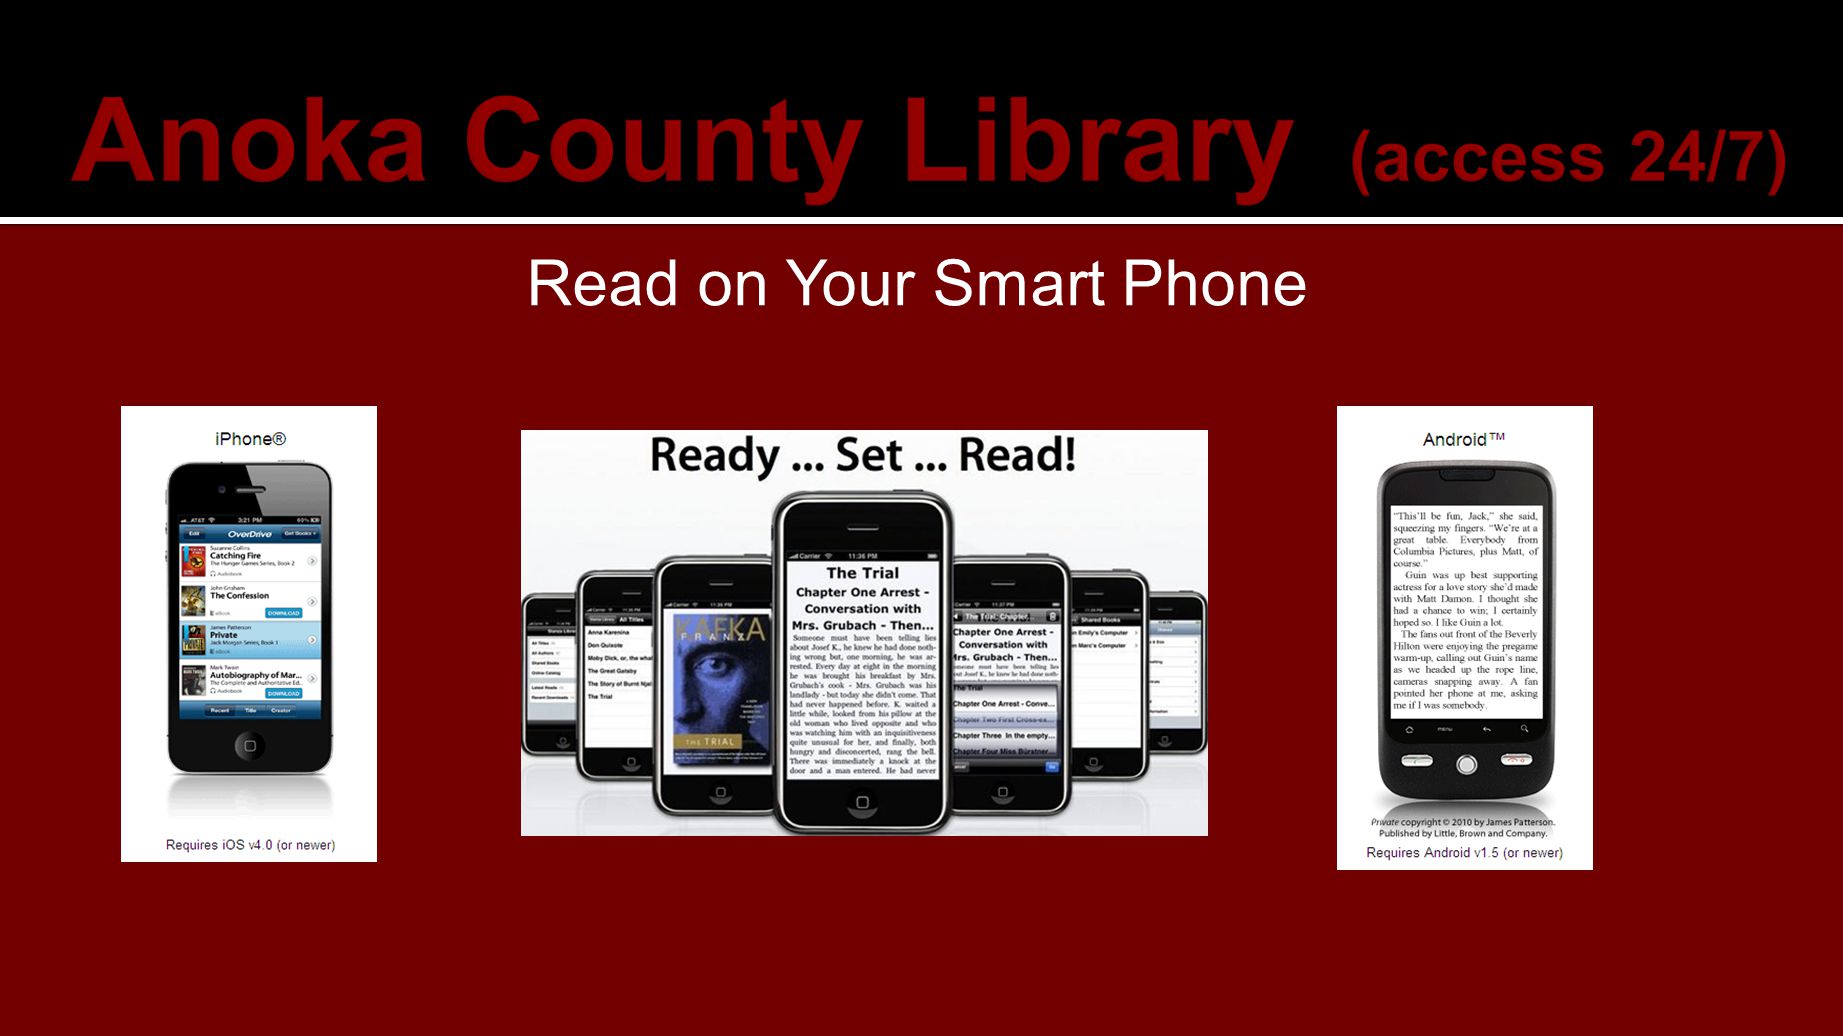 Read on Your Smart Phone